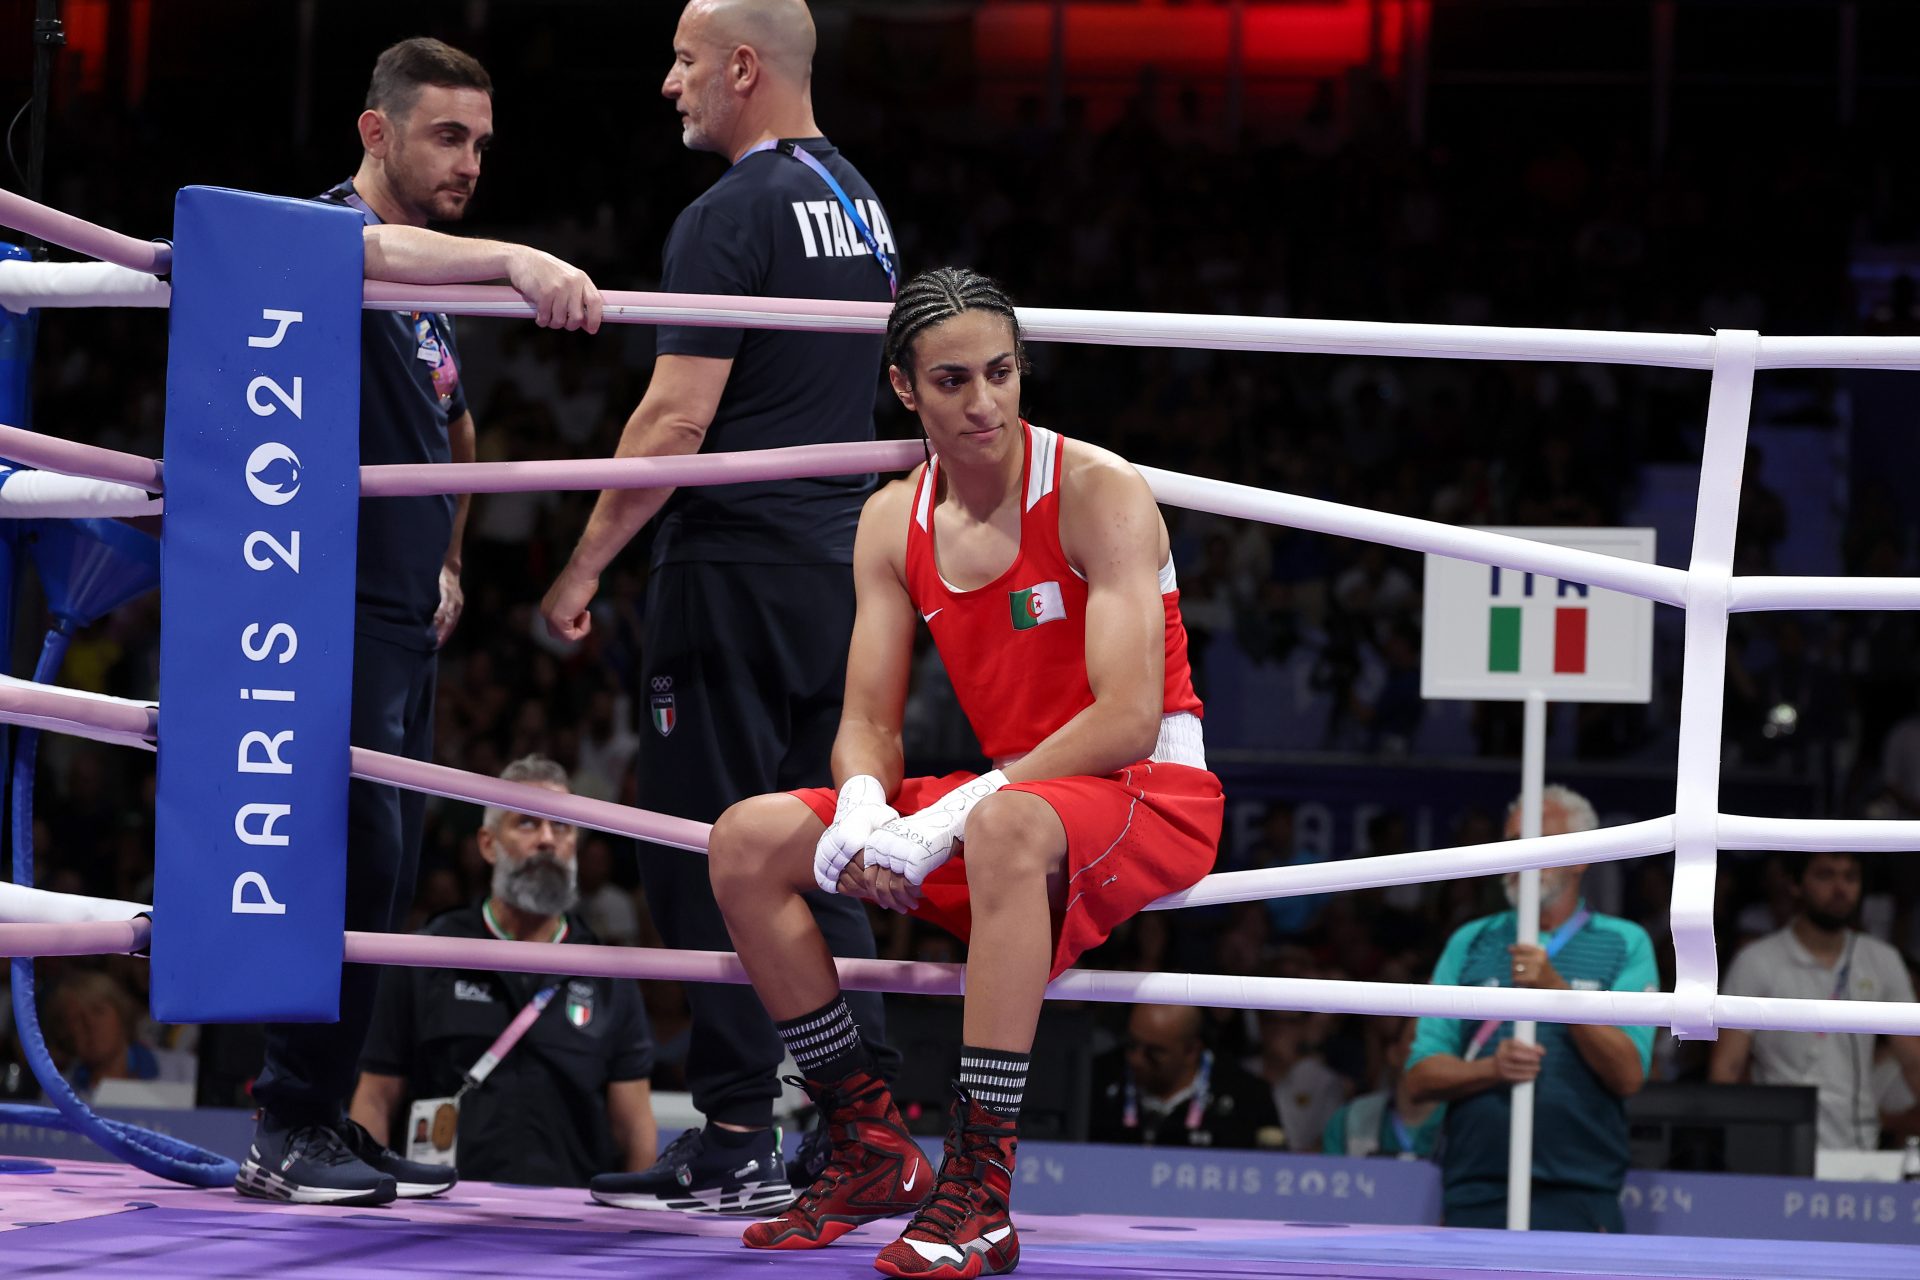 Should alleged 'biological male' boxer be banned from the Olympics after controversial victory?